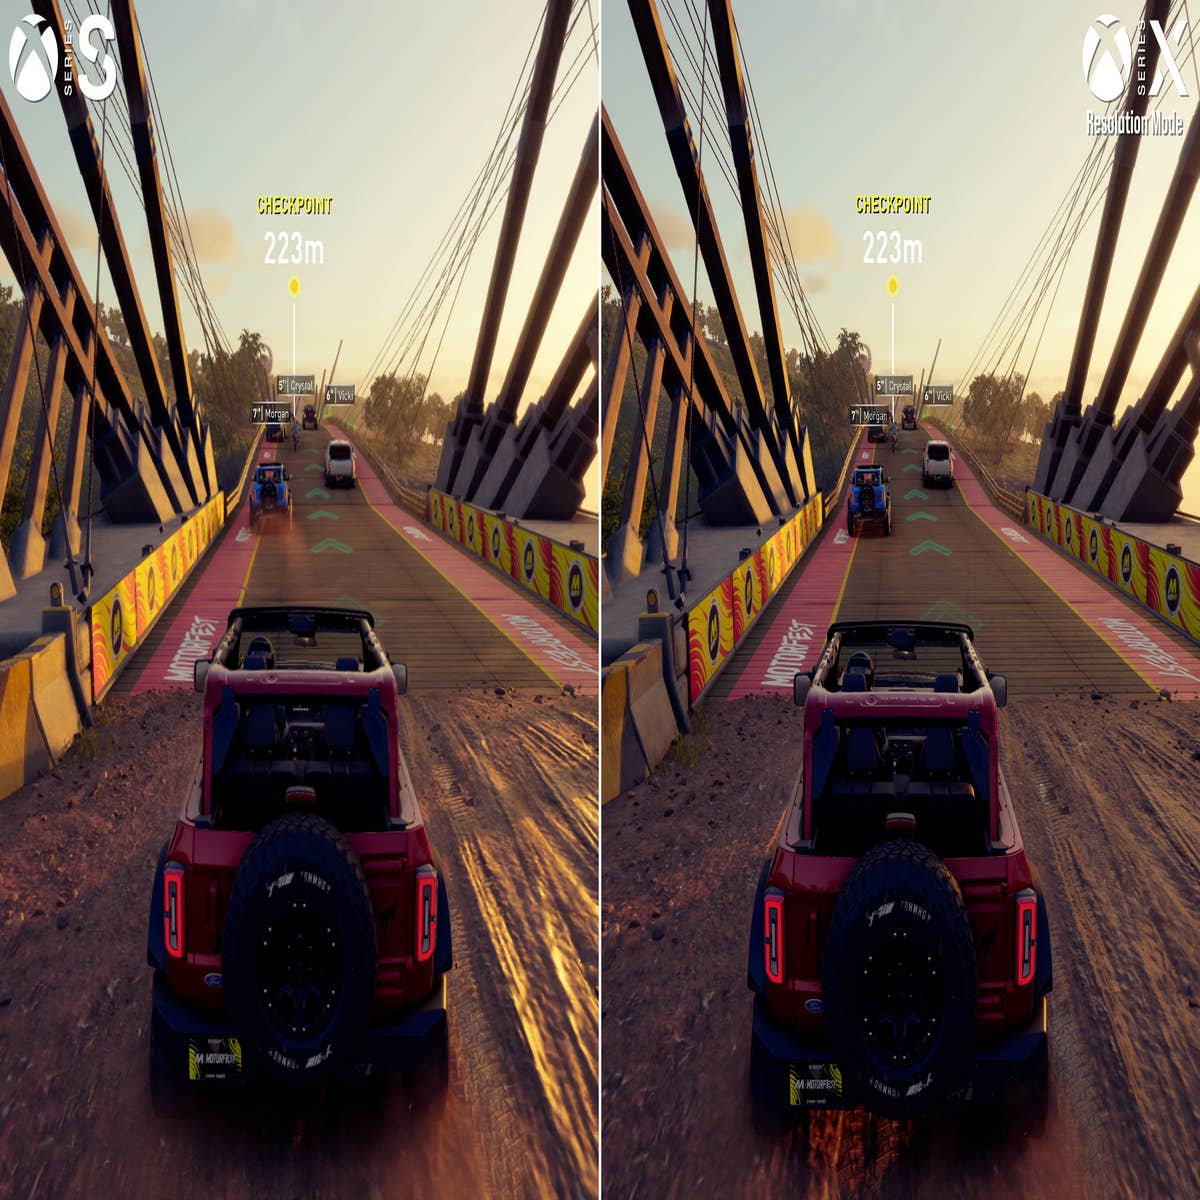 The Crew Motorfest vs. The Crew 2: How does the sequel stack against its  predecessor?